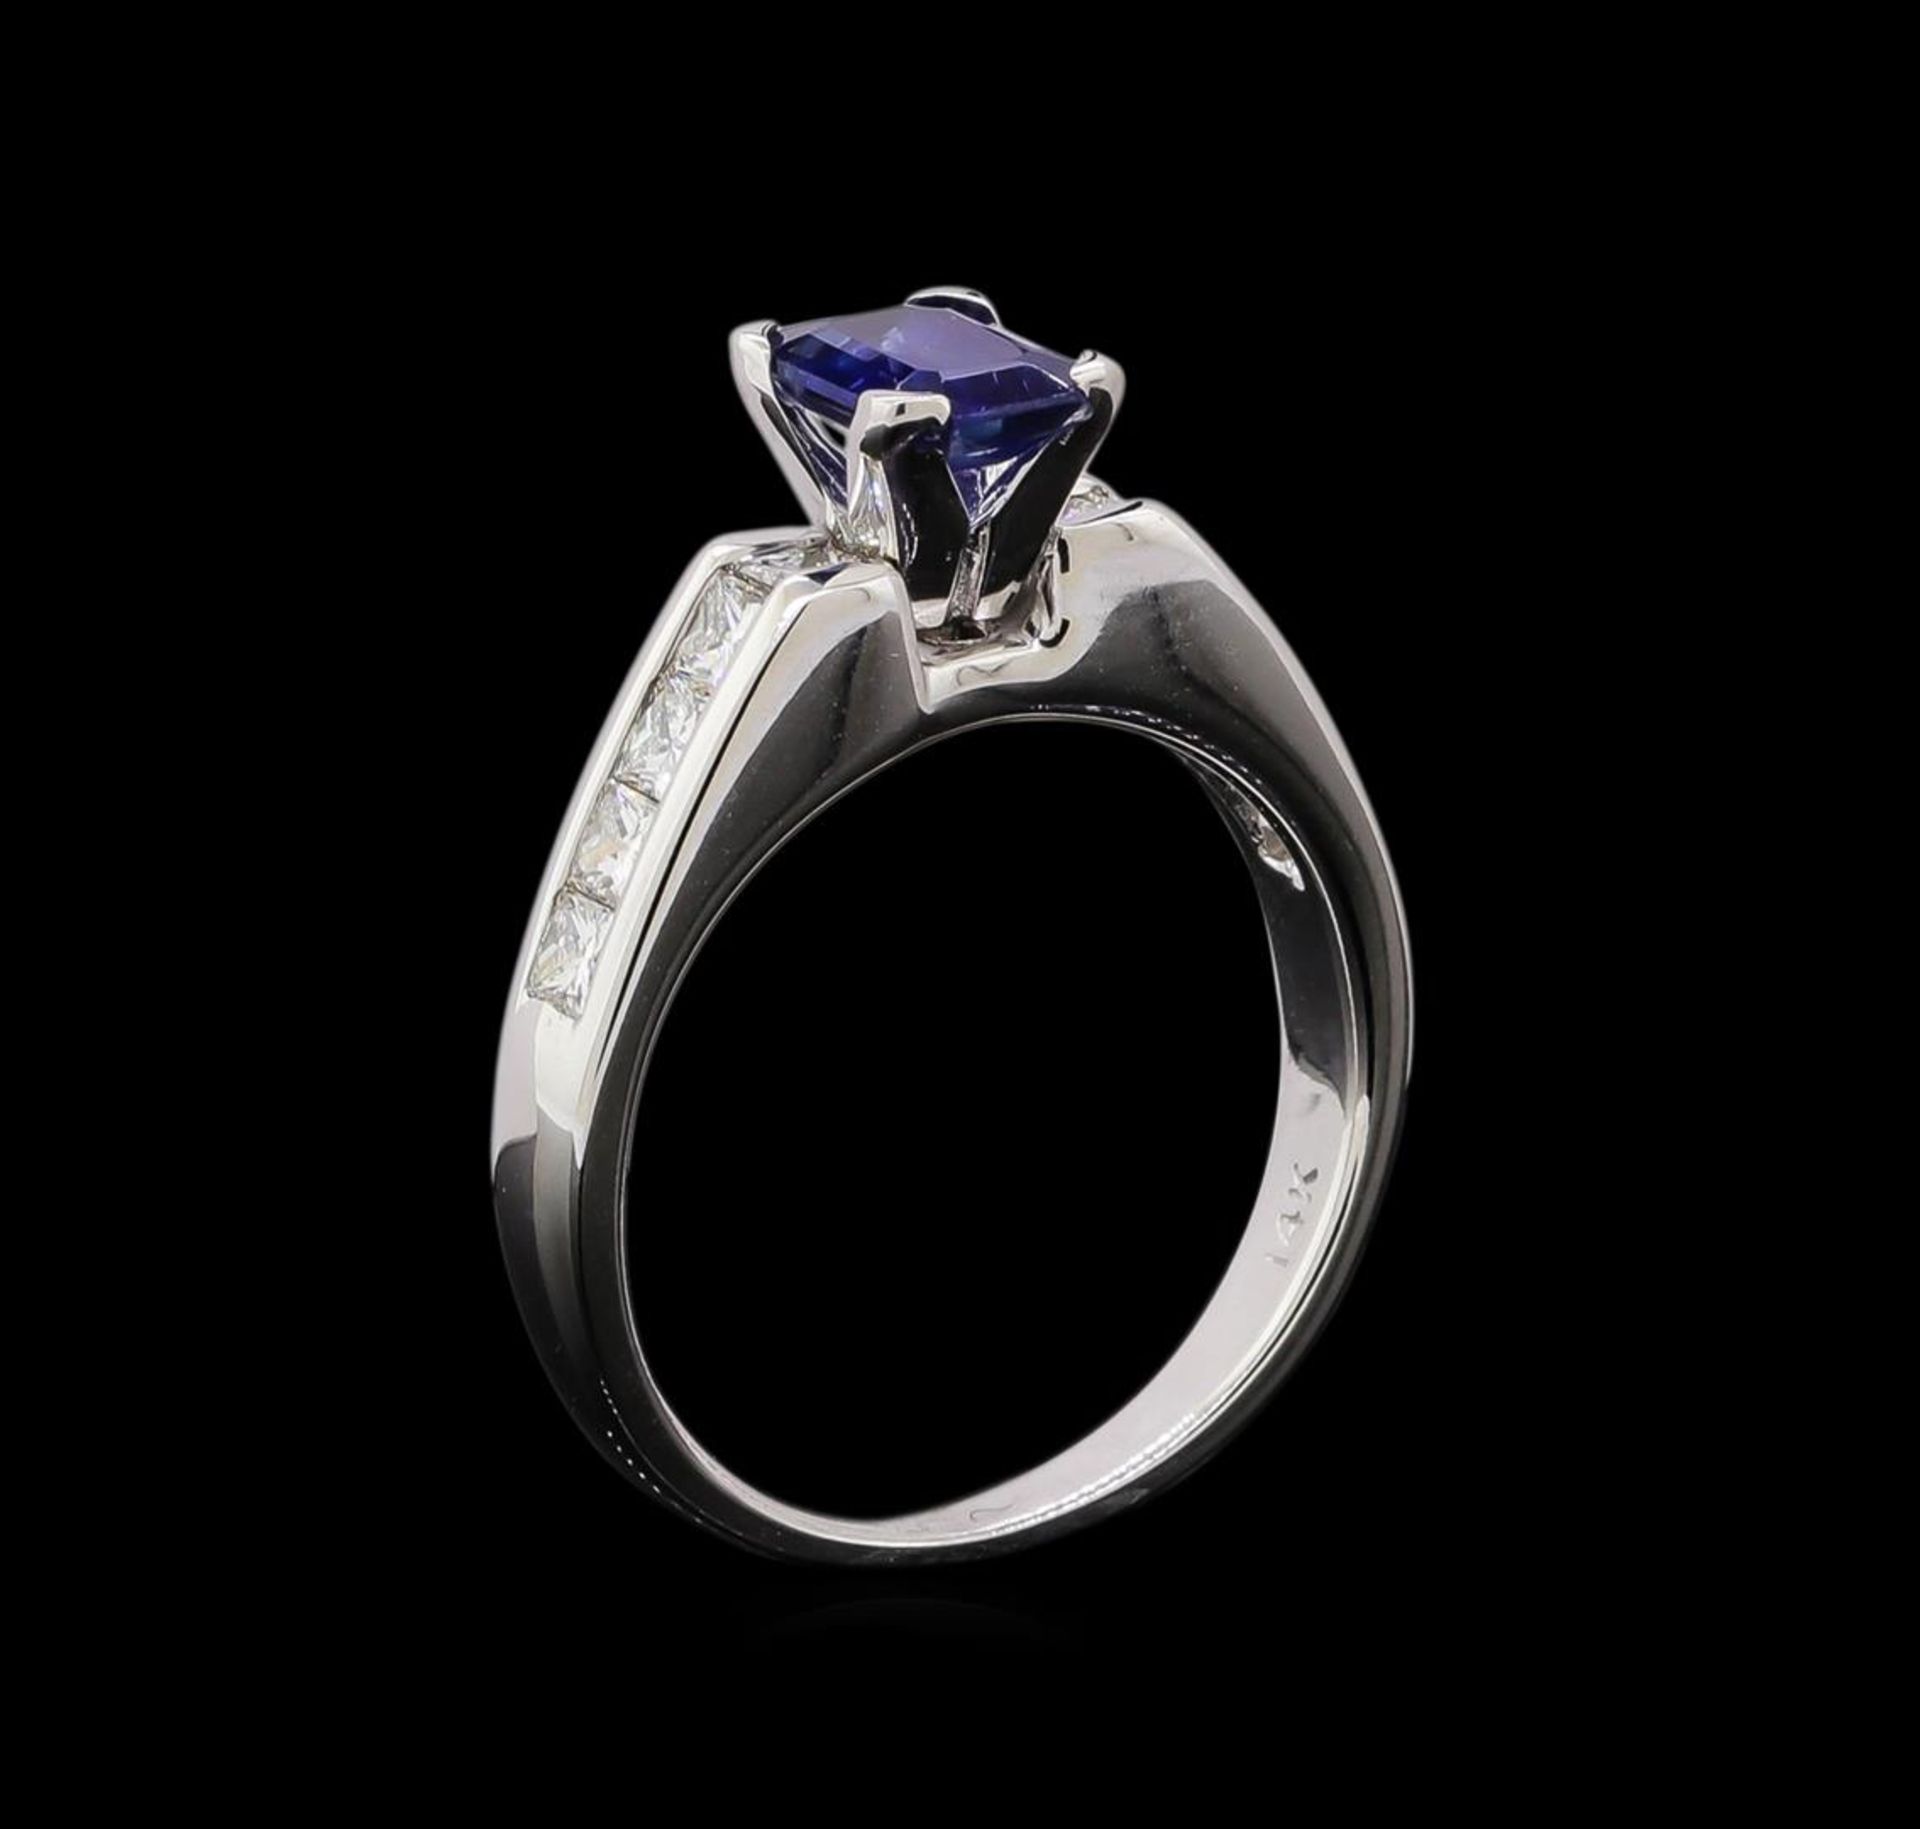 0.95 ctw Sapphire and Diamond Ring - 14KT White Gold - Image 4 of 4